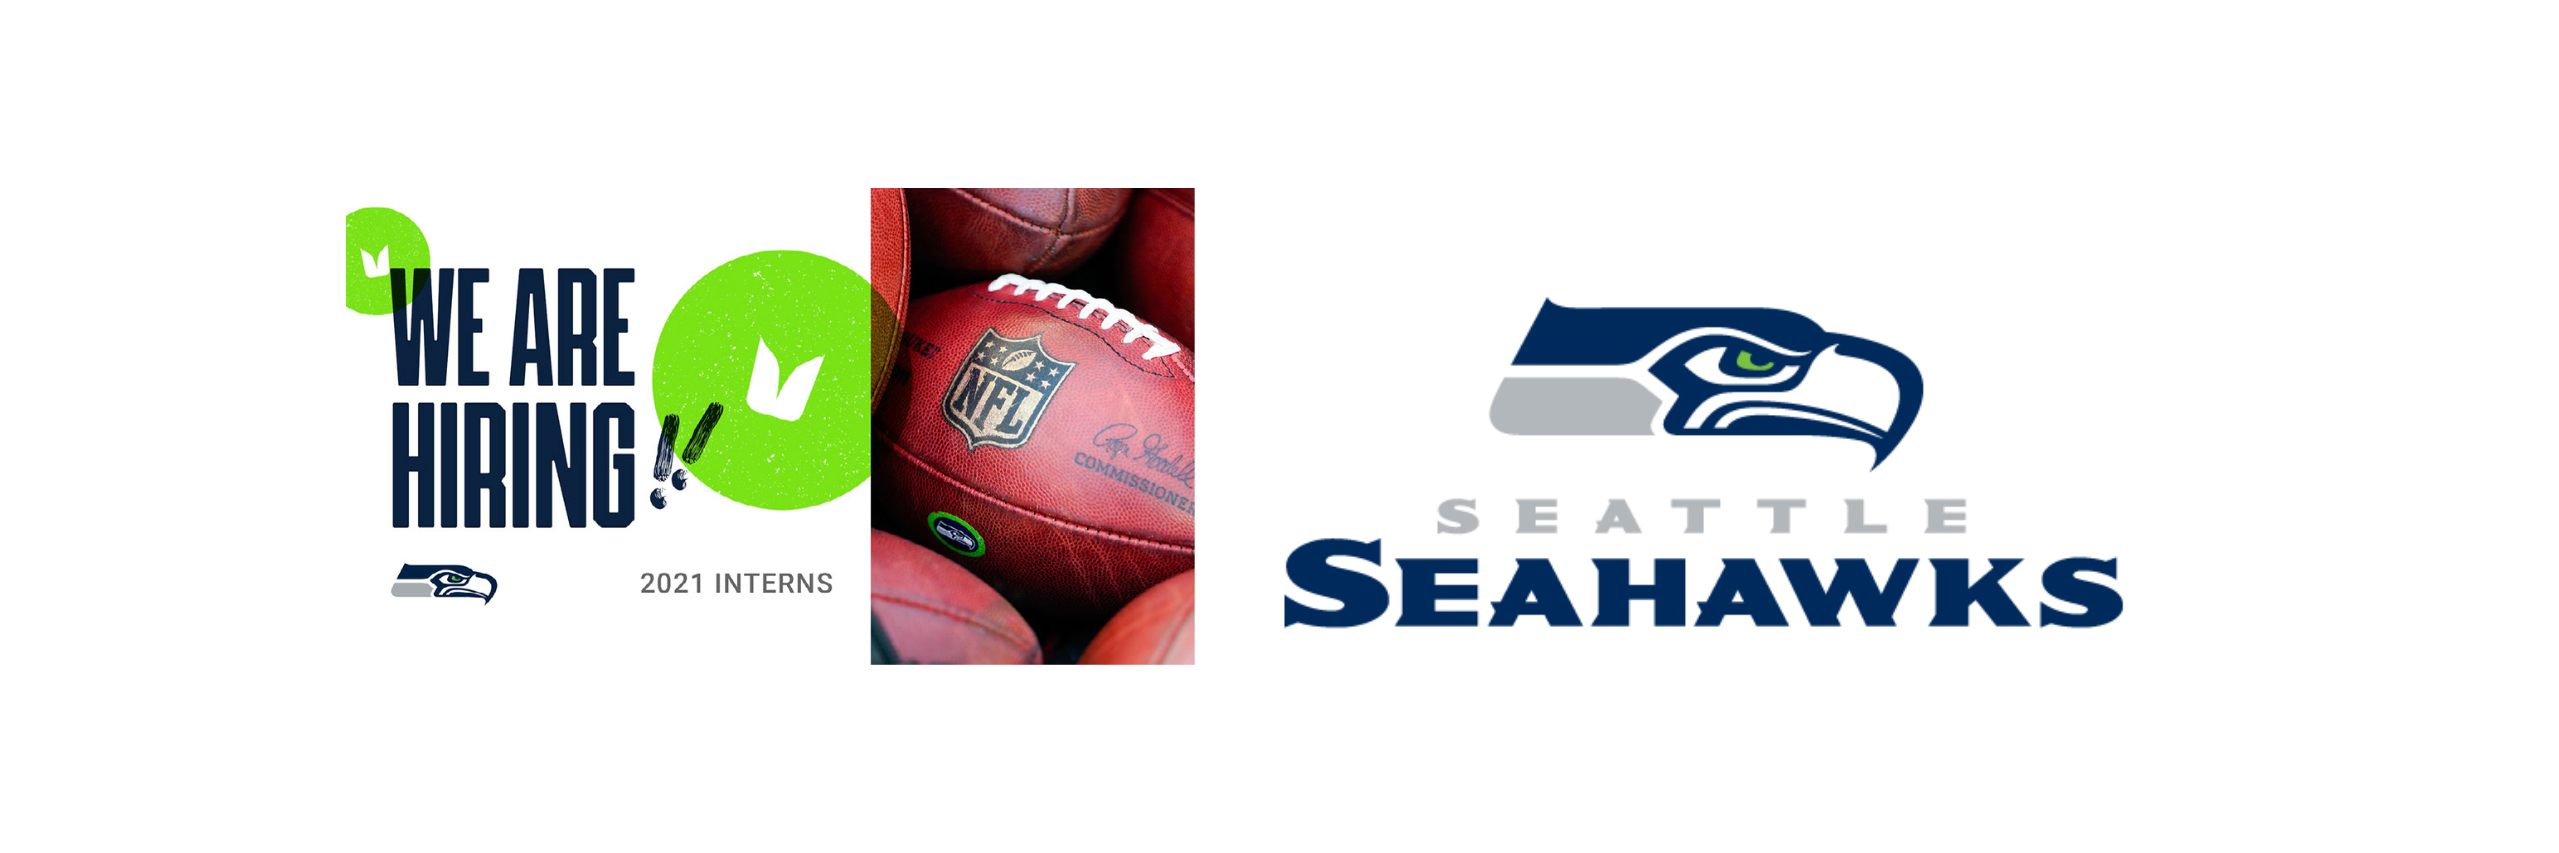 Puyallup Tribal Members Encouraged to Apply for Paid Seahawks